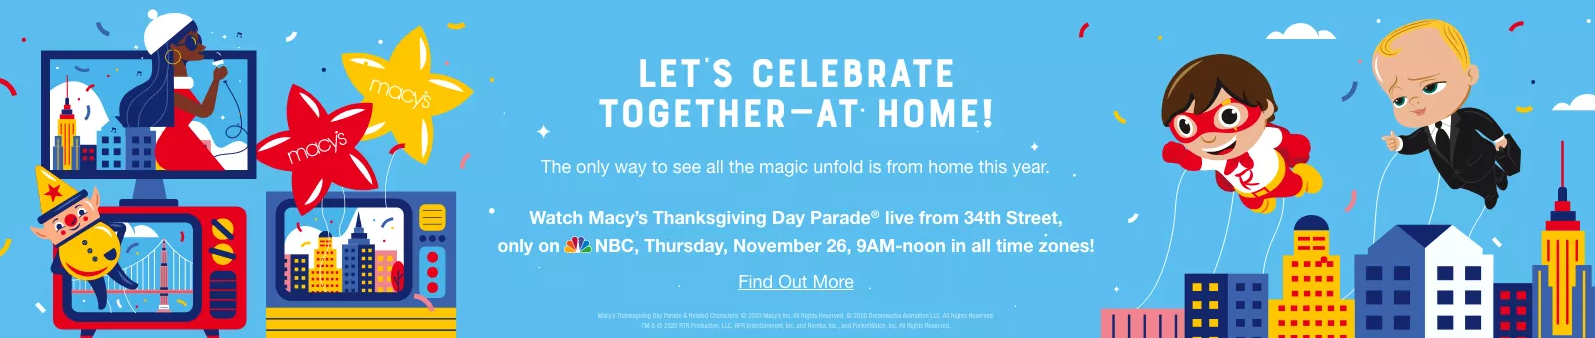 Macy's Thanksgiving Day Parade Info-Everything You Need to Know